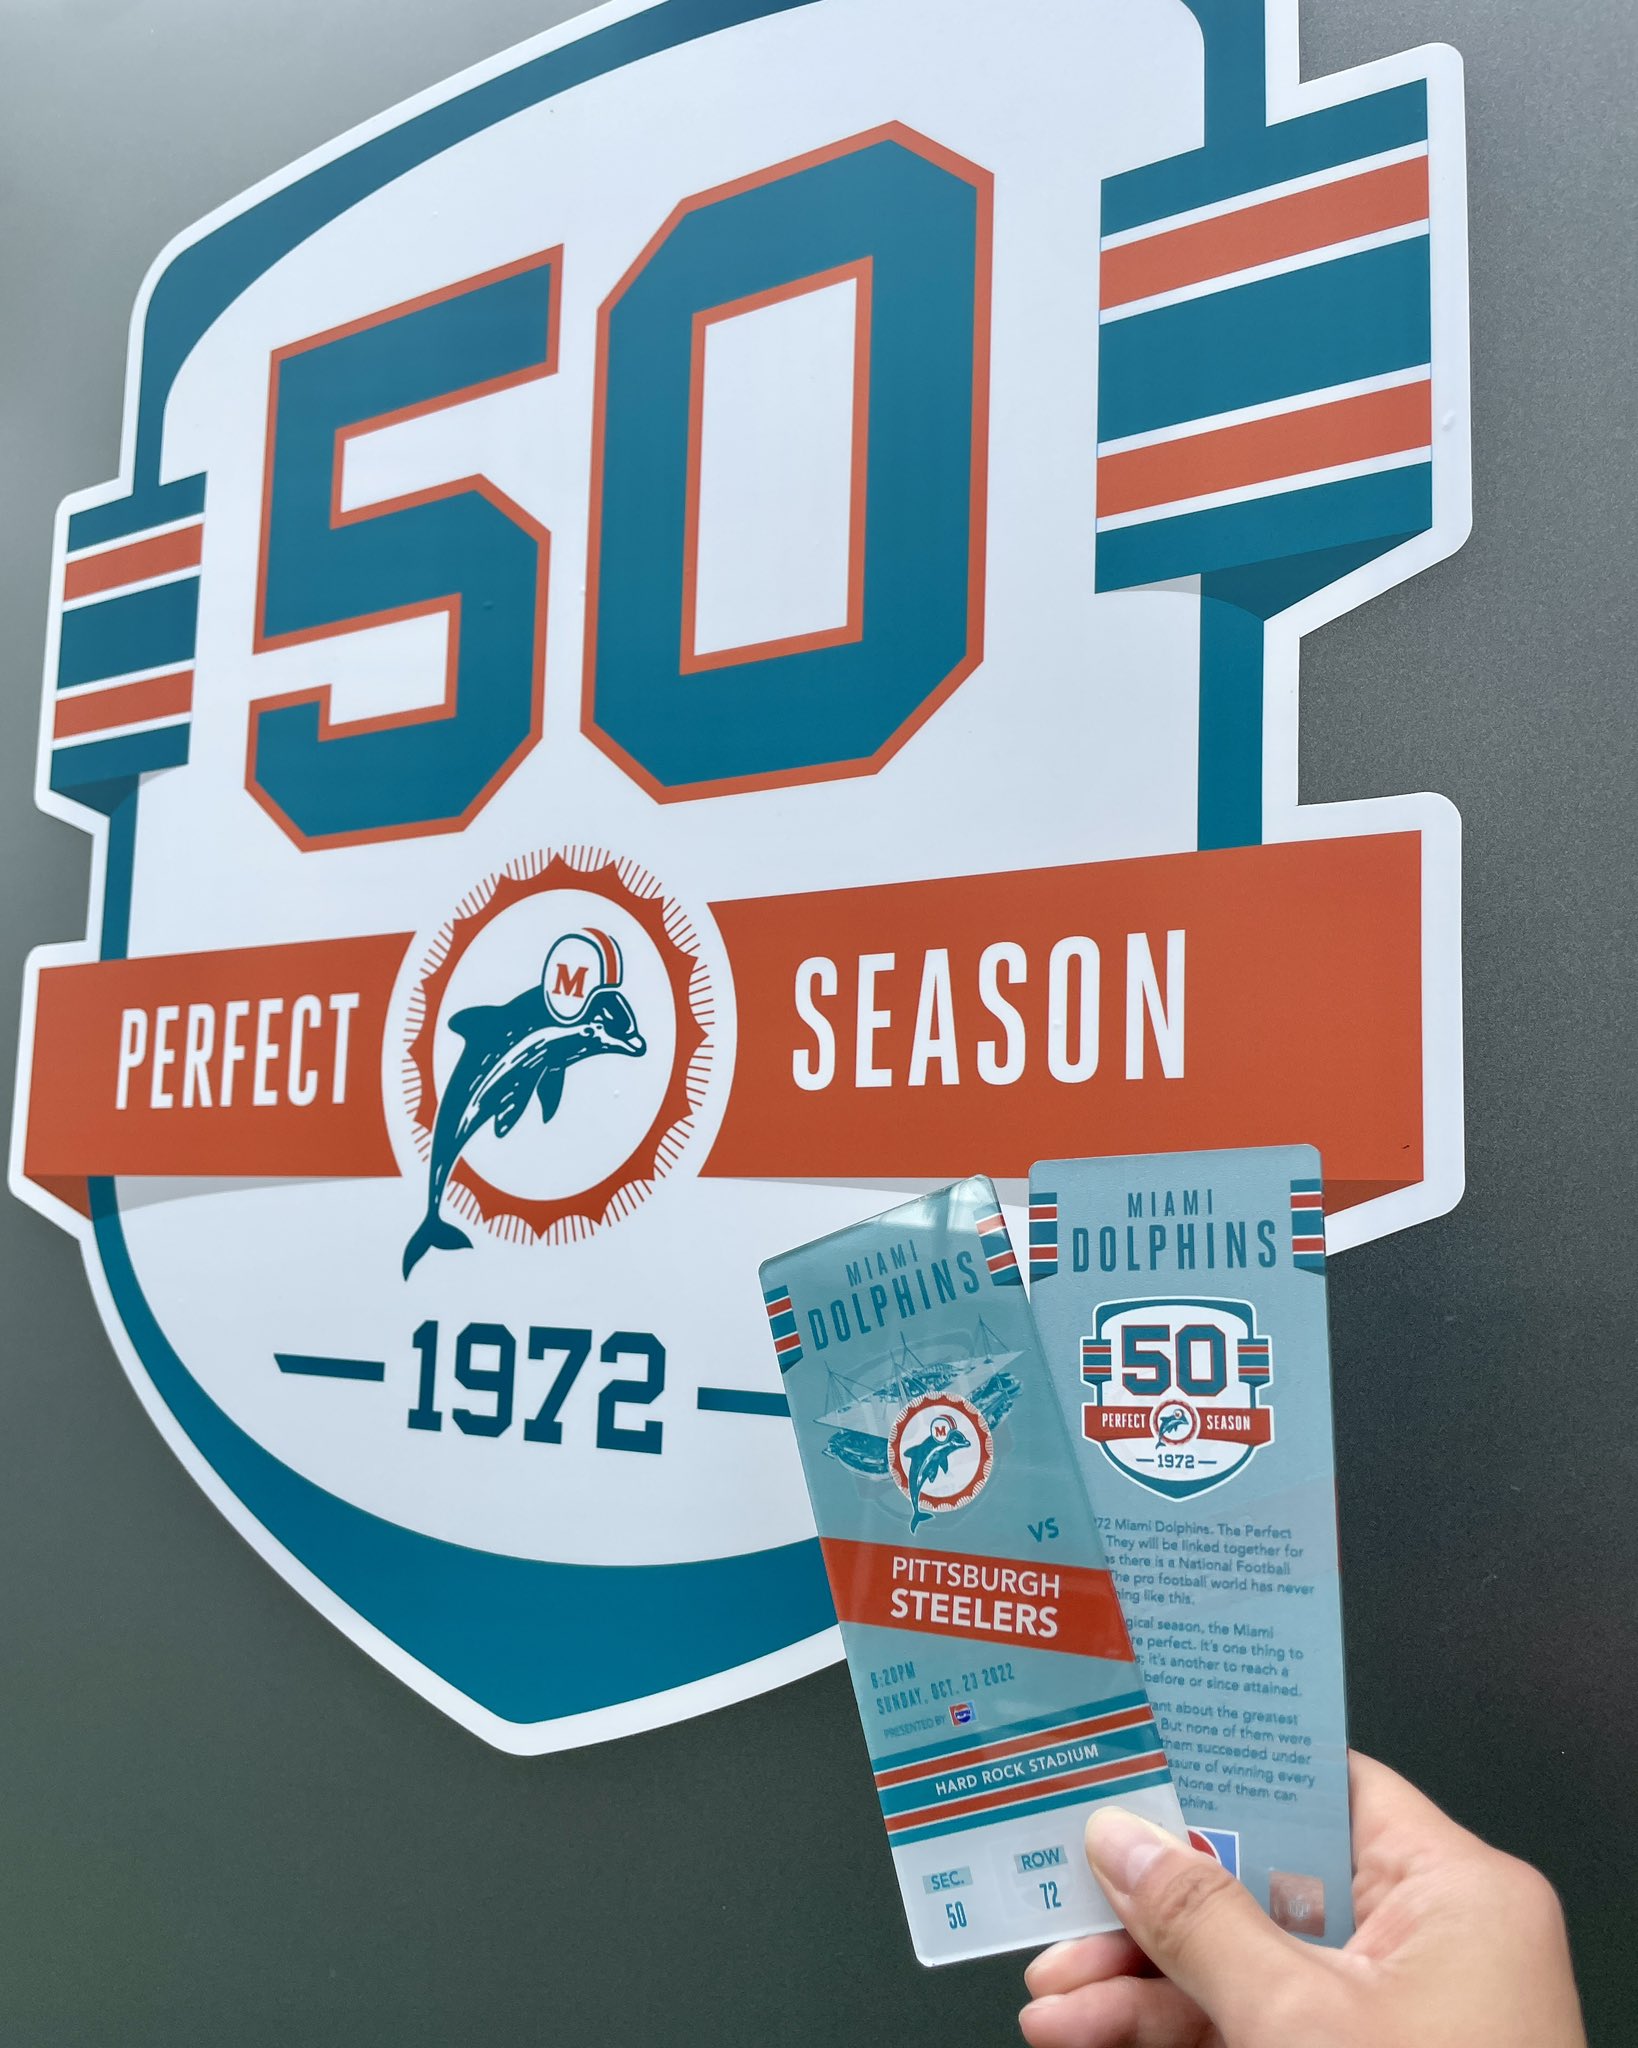 Hard Rock Stadium on X: 'Today's special @MiamiDolphins giveaway to  celebrate 50 years of the Perfect Season! 